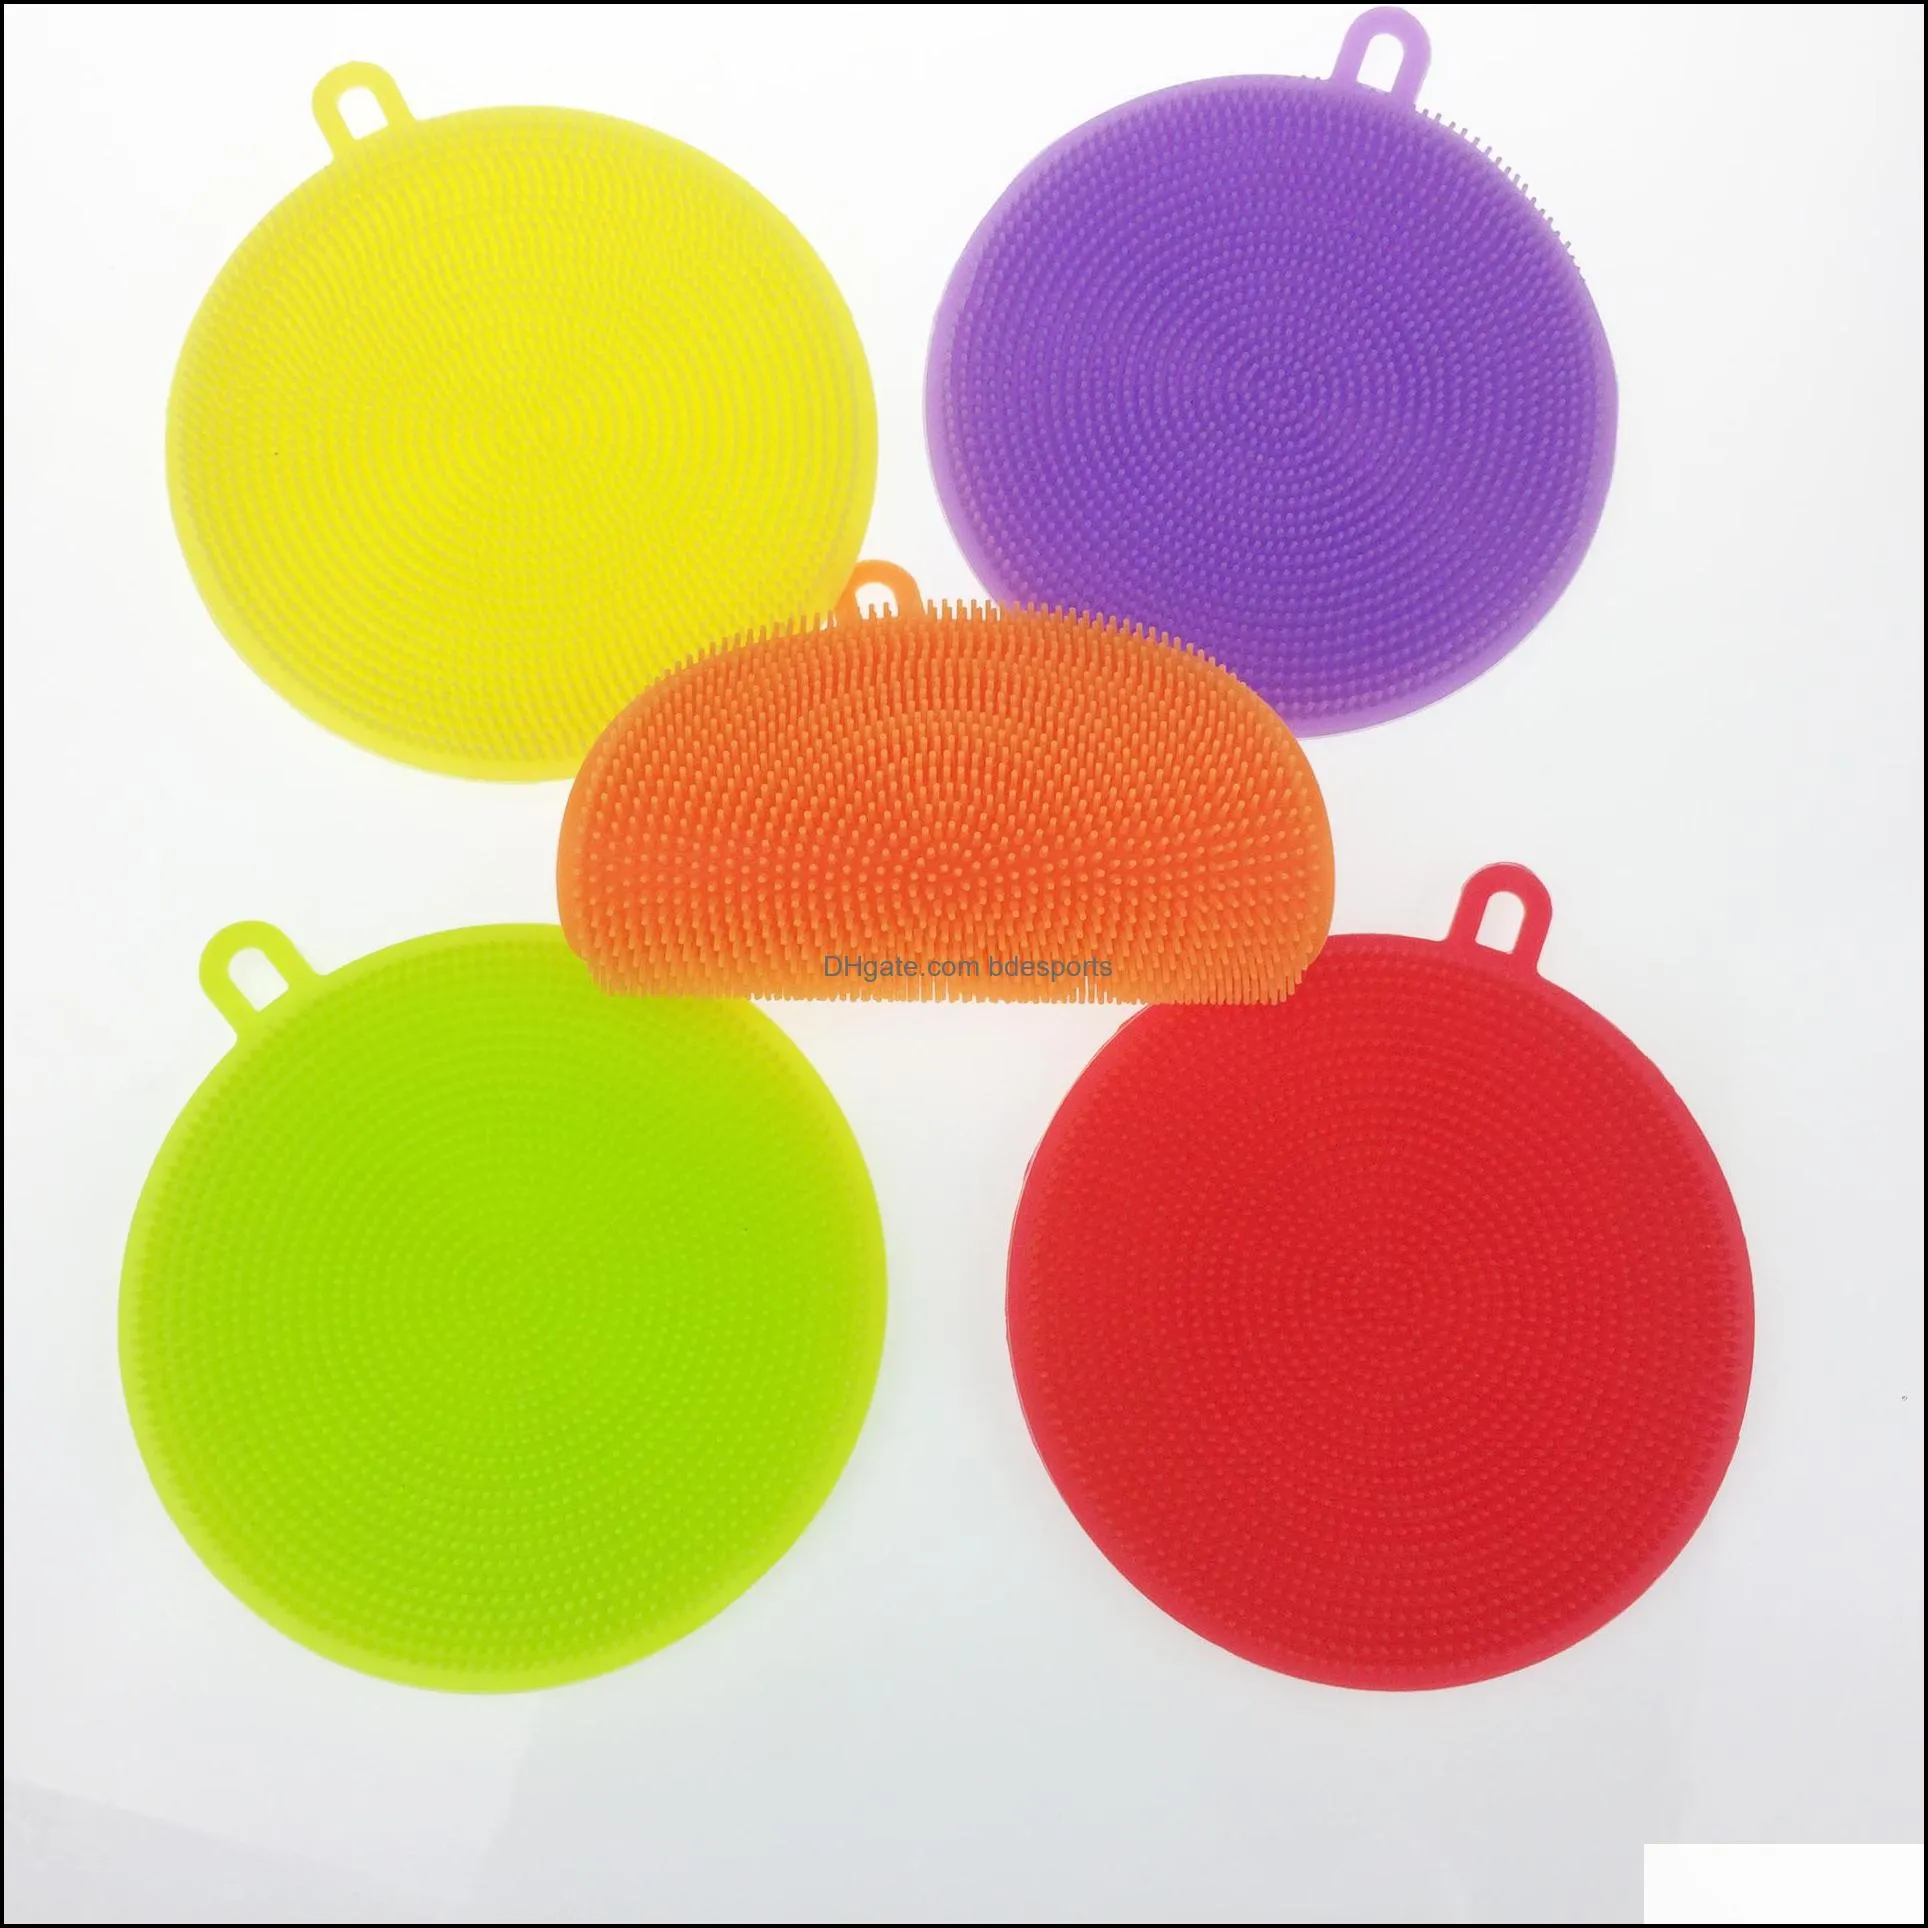 Clean Brush Creative Heat Resistant For Kitchen Cleaning Tools Colourful Circular Silicone Fruit Vegetable Tableware BrushES 3 3ad C